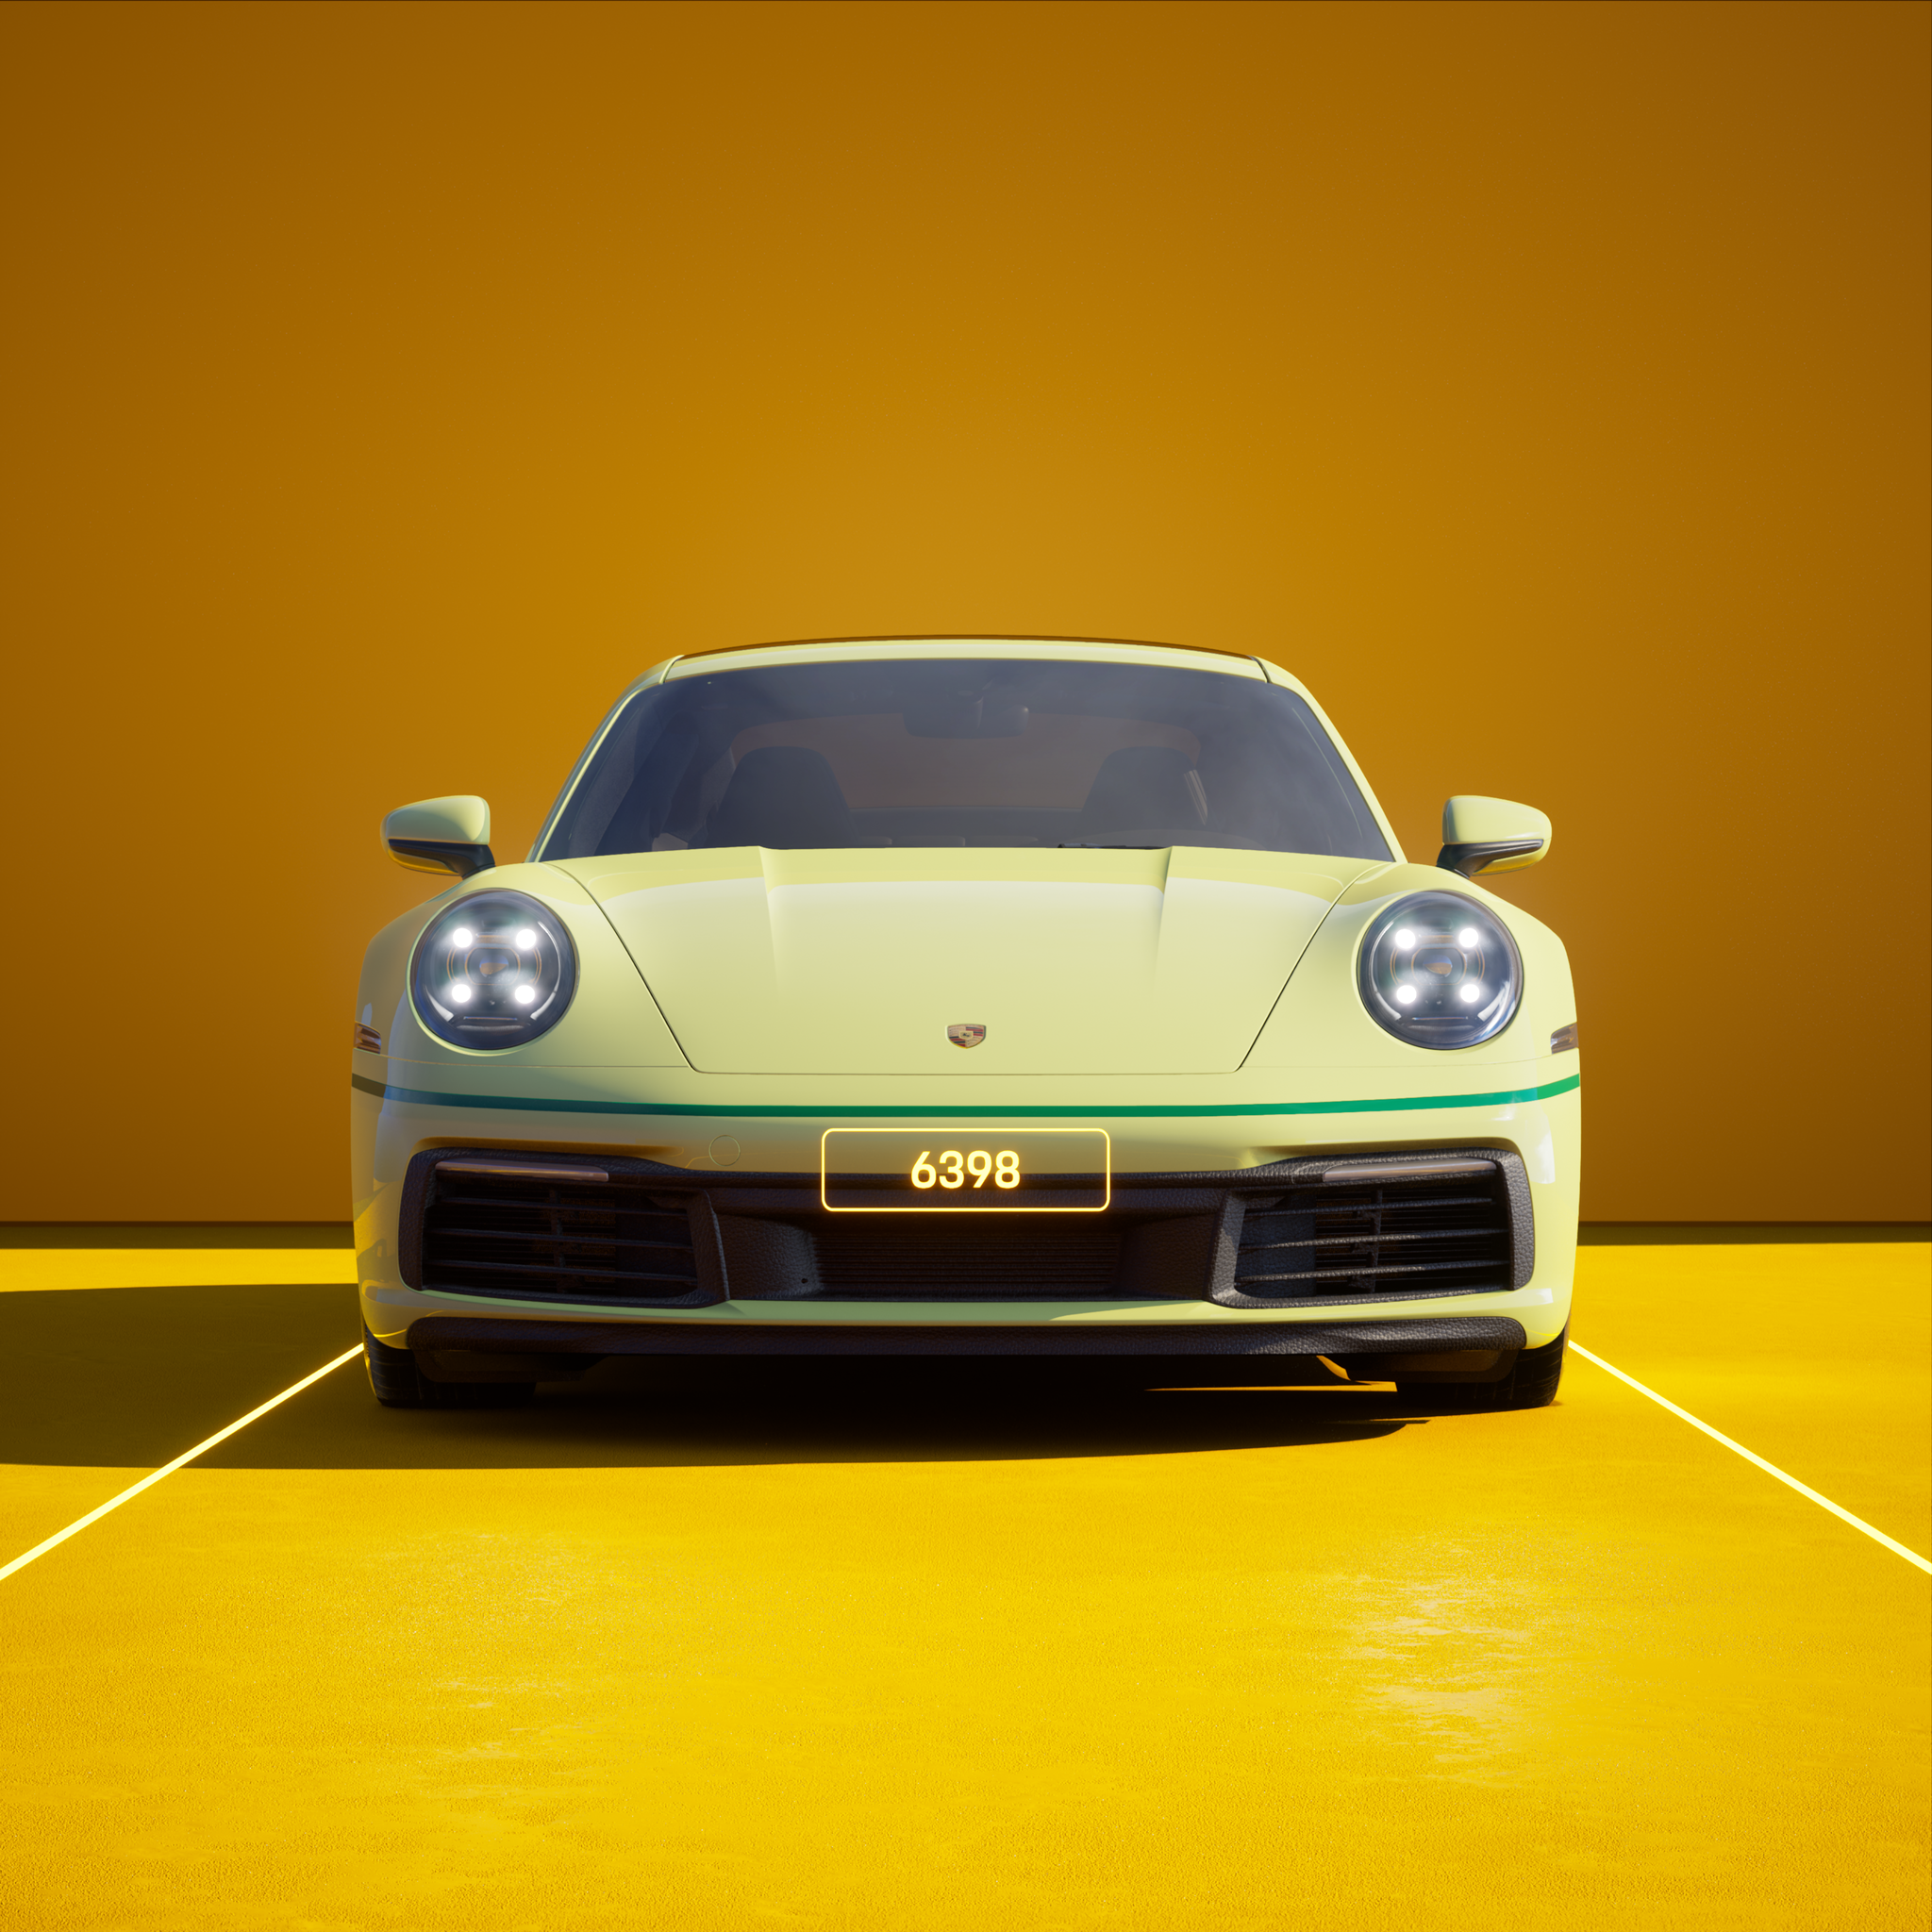 The PORSCHΞ 911 6398 image in phase